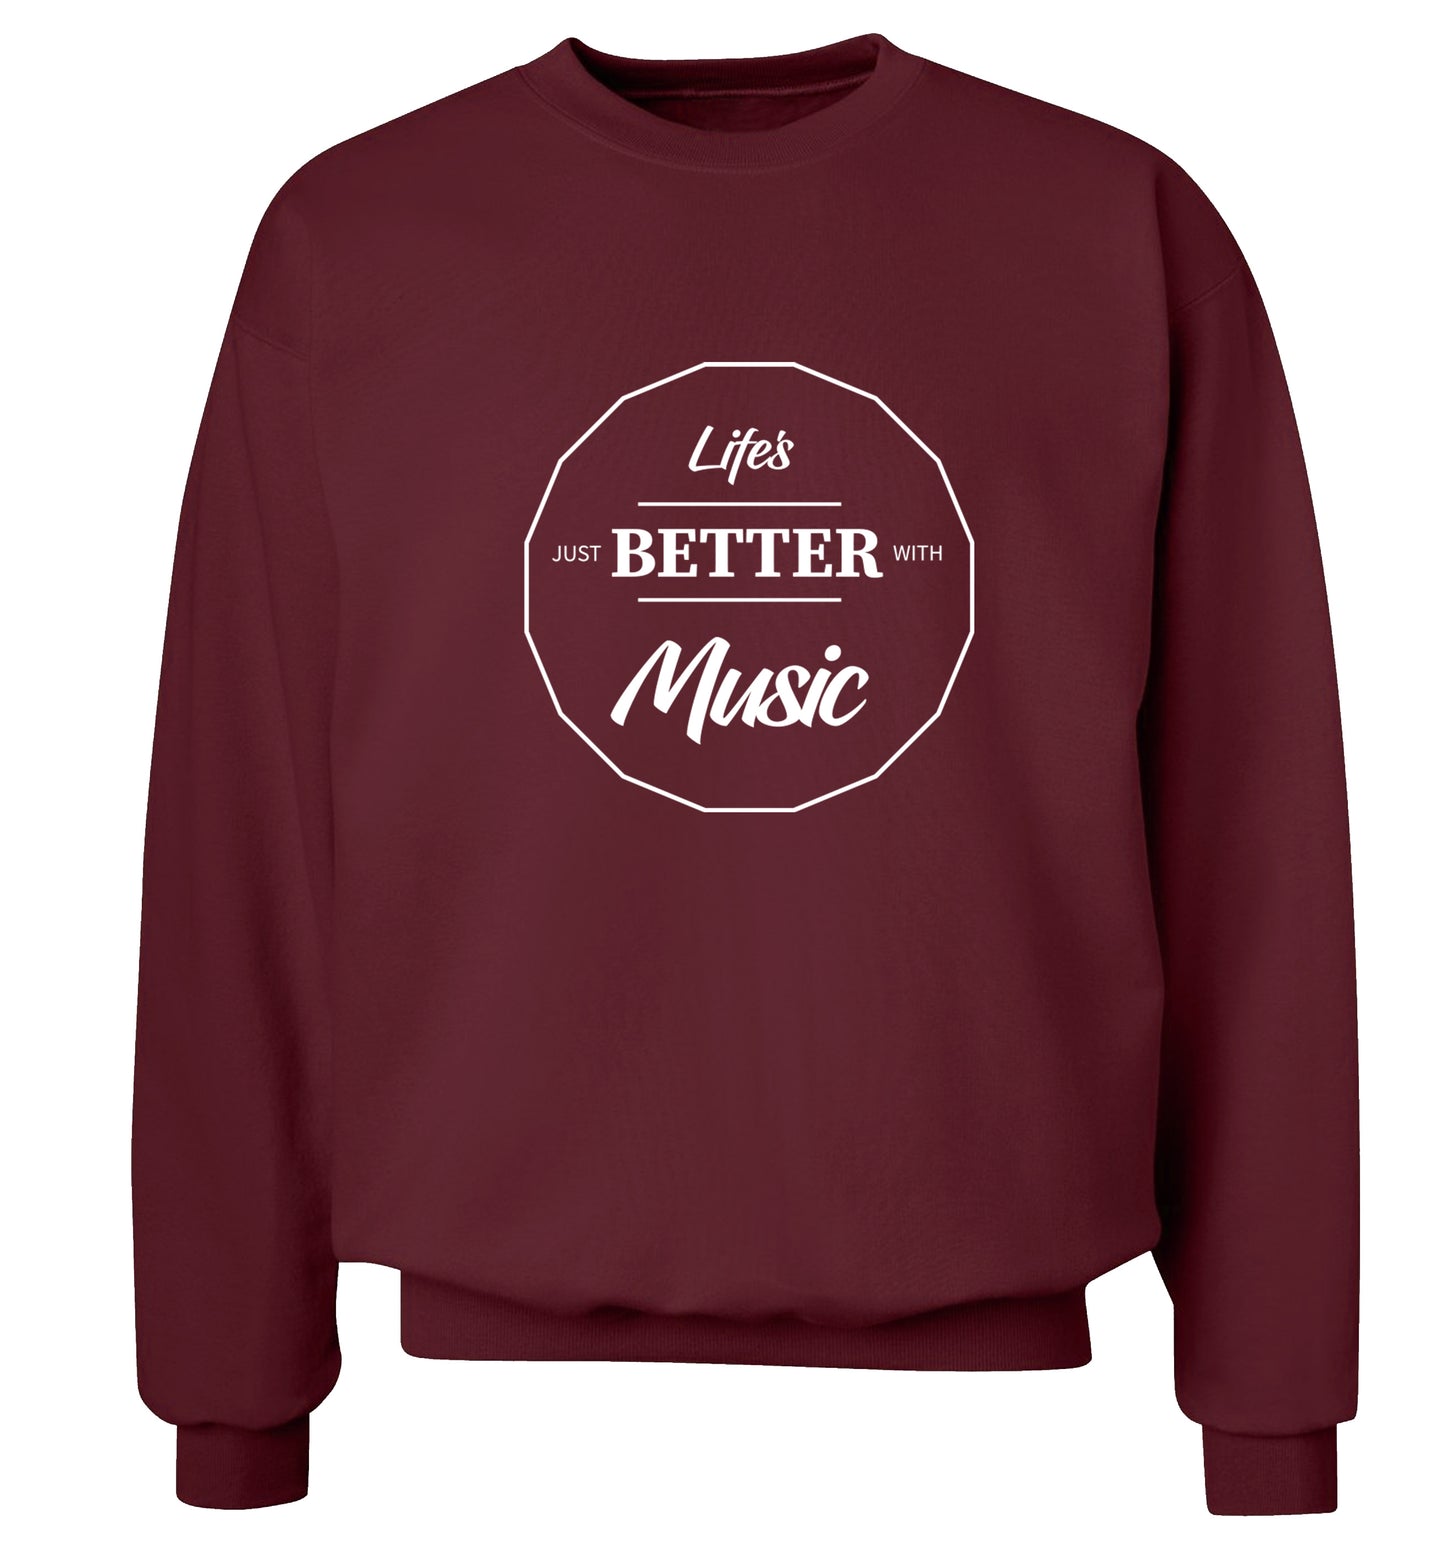 Life is Better With Music Adult's unisex maroon Sweater 2XL